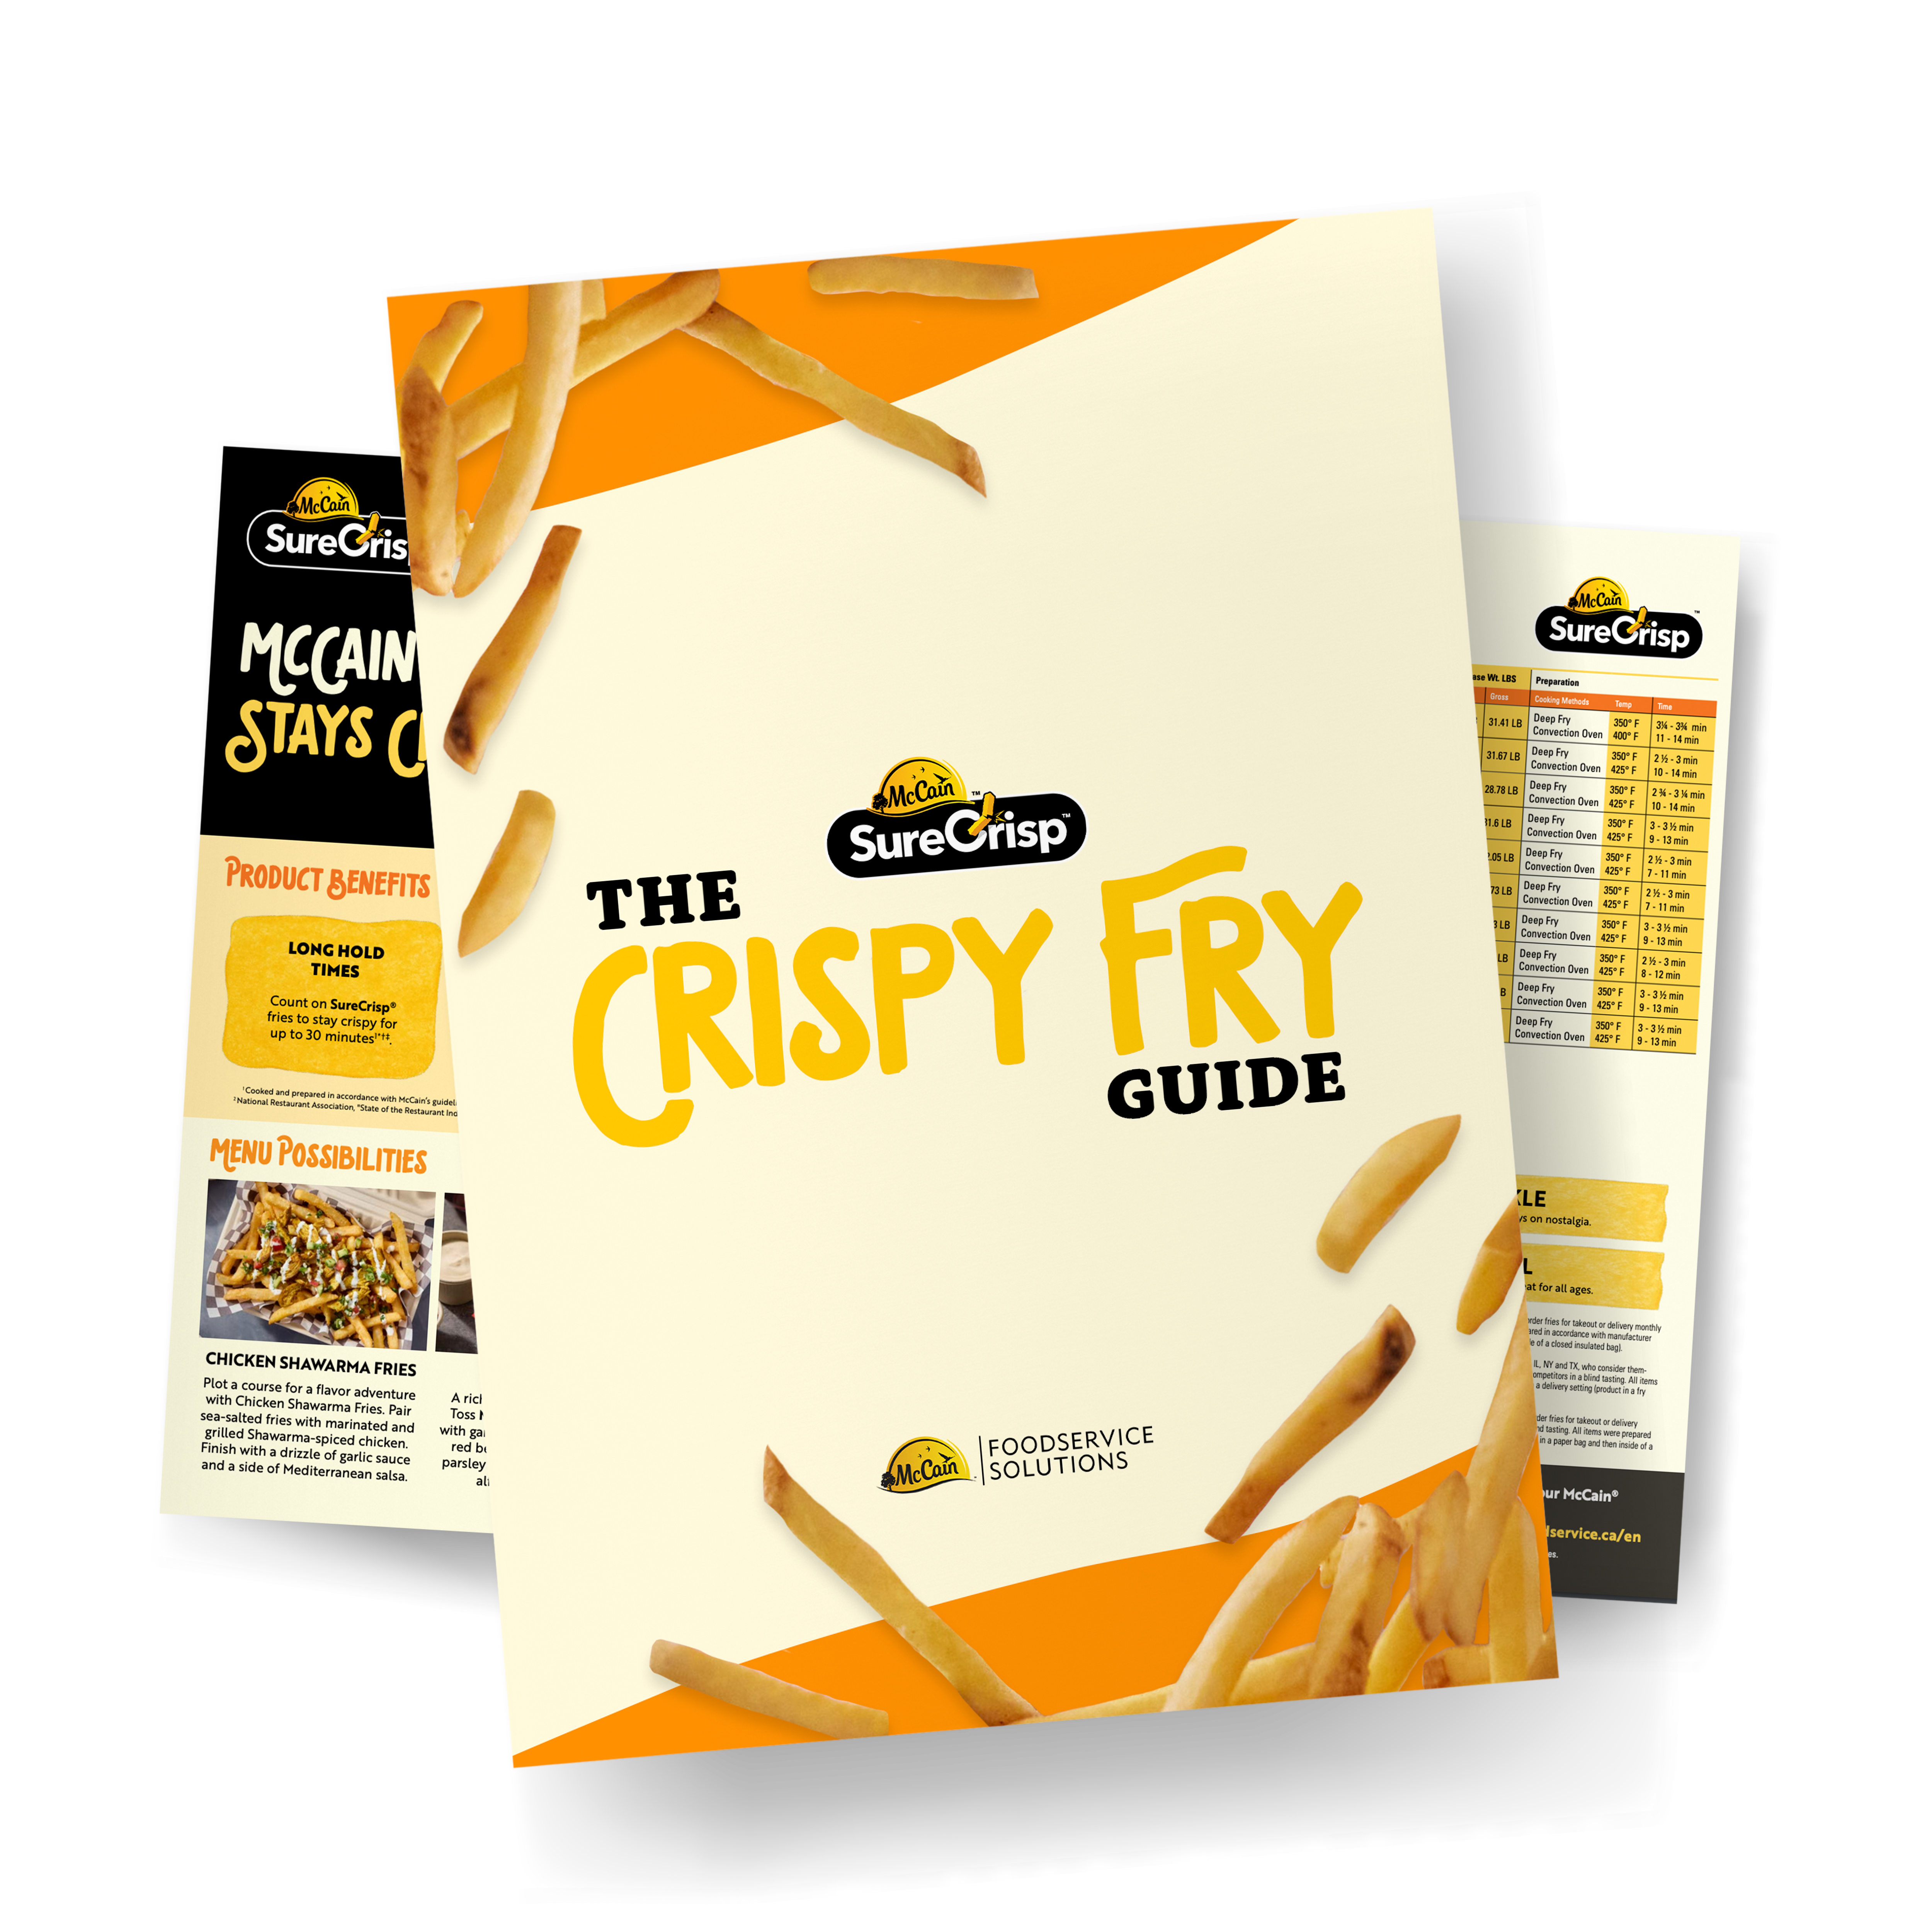 McCain® SureCrisp® Crispy Fry Guide - your guide to product details and menu inspiration.